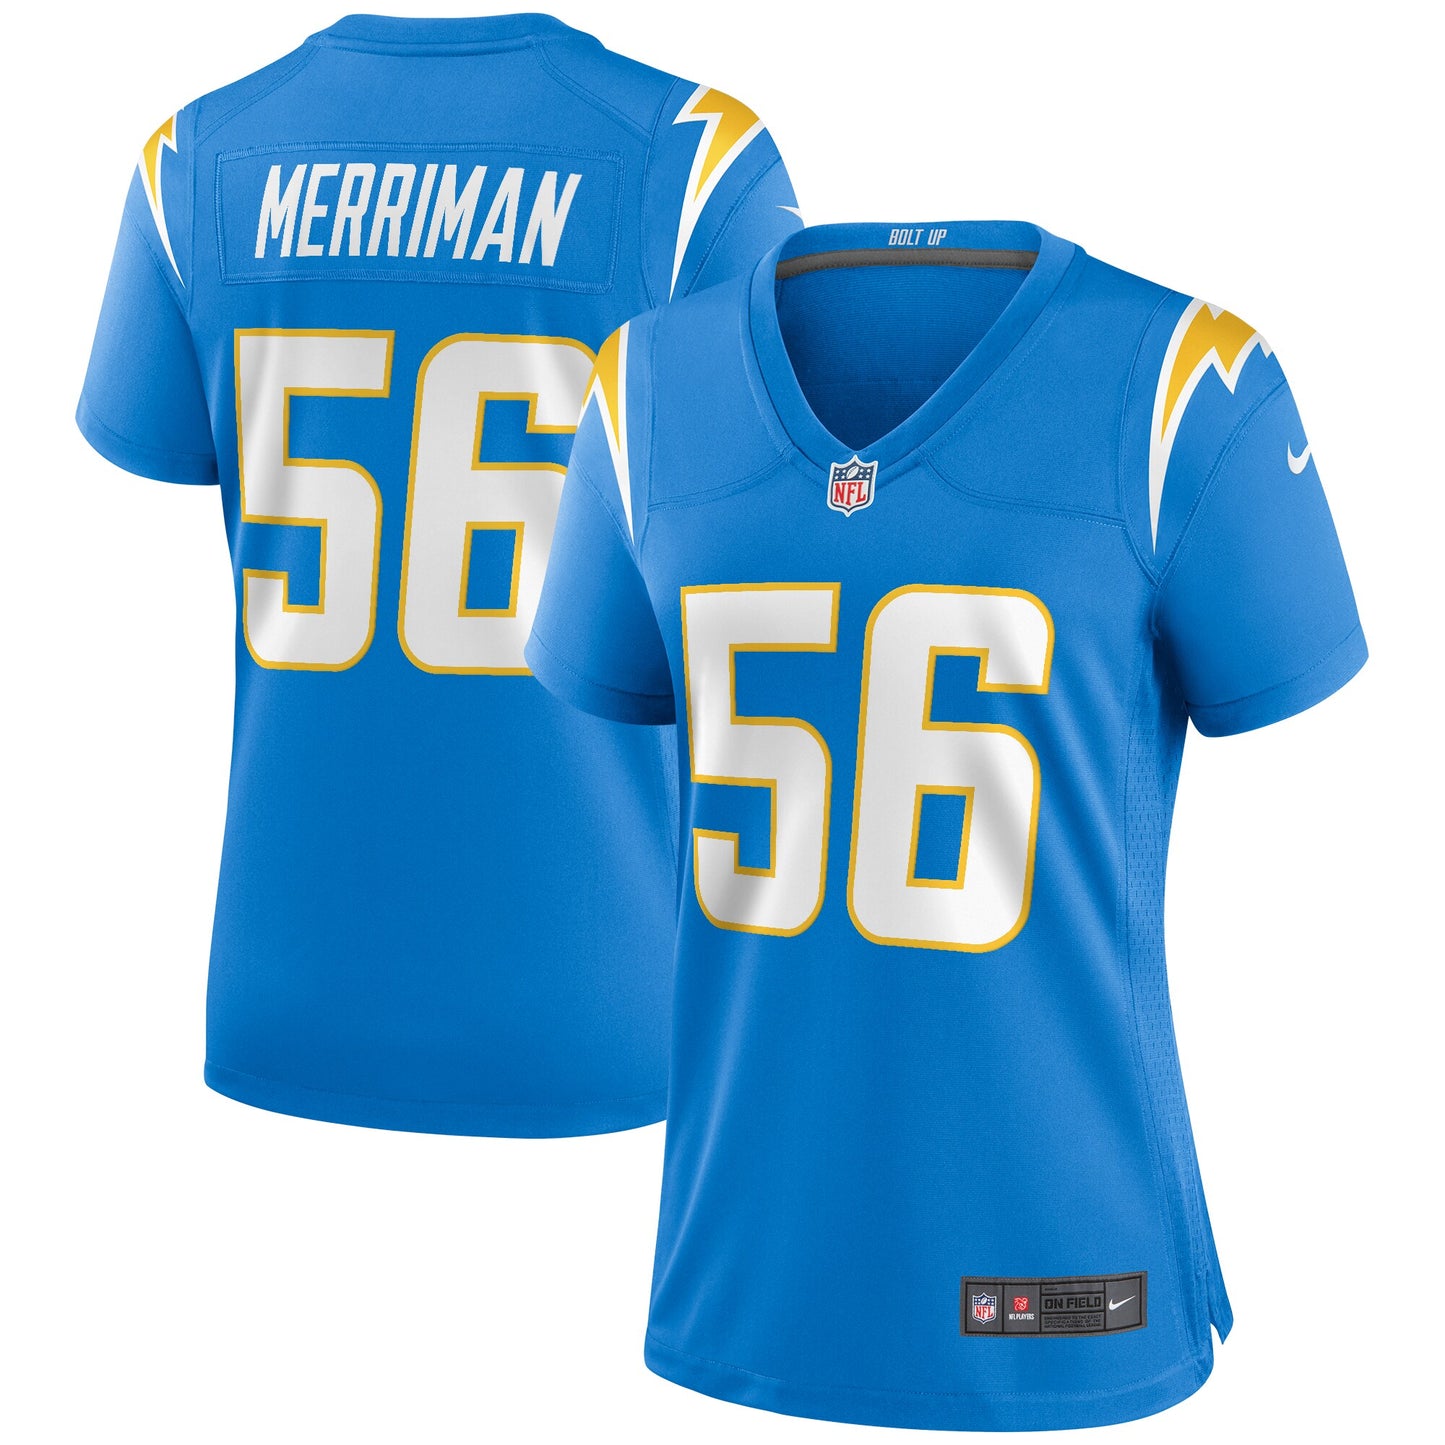 Shawne Merriman Los Angeles Chargers Nike Women's Game Retired Player Jersey - Powder Blue